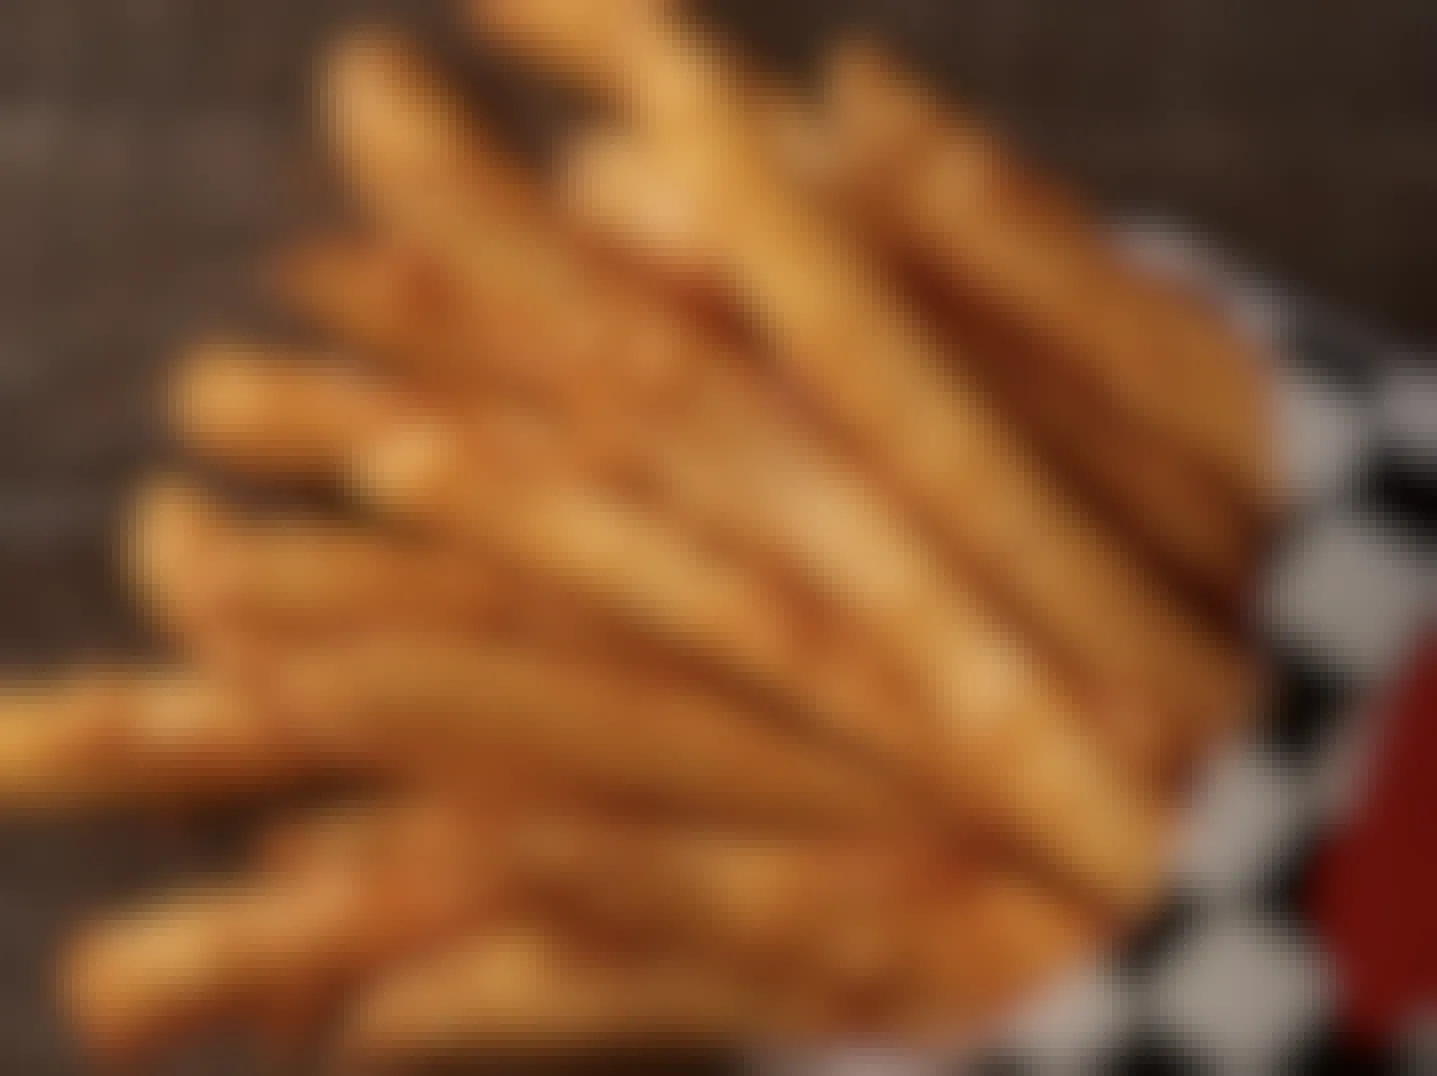 A close up of a large fry from Checkers on a table.